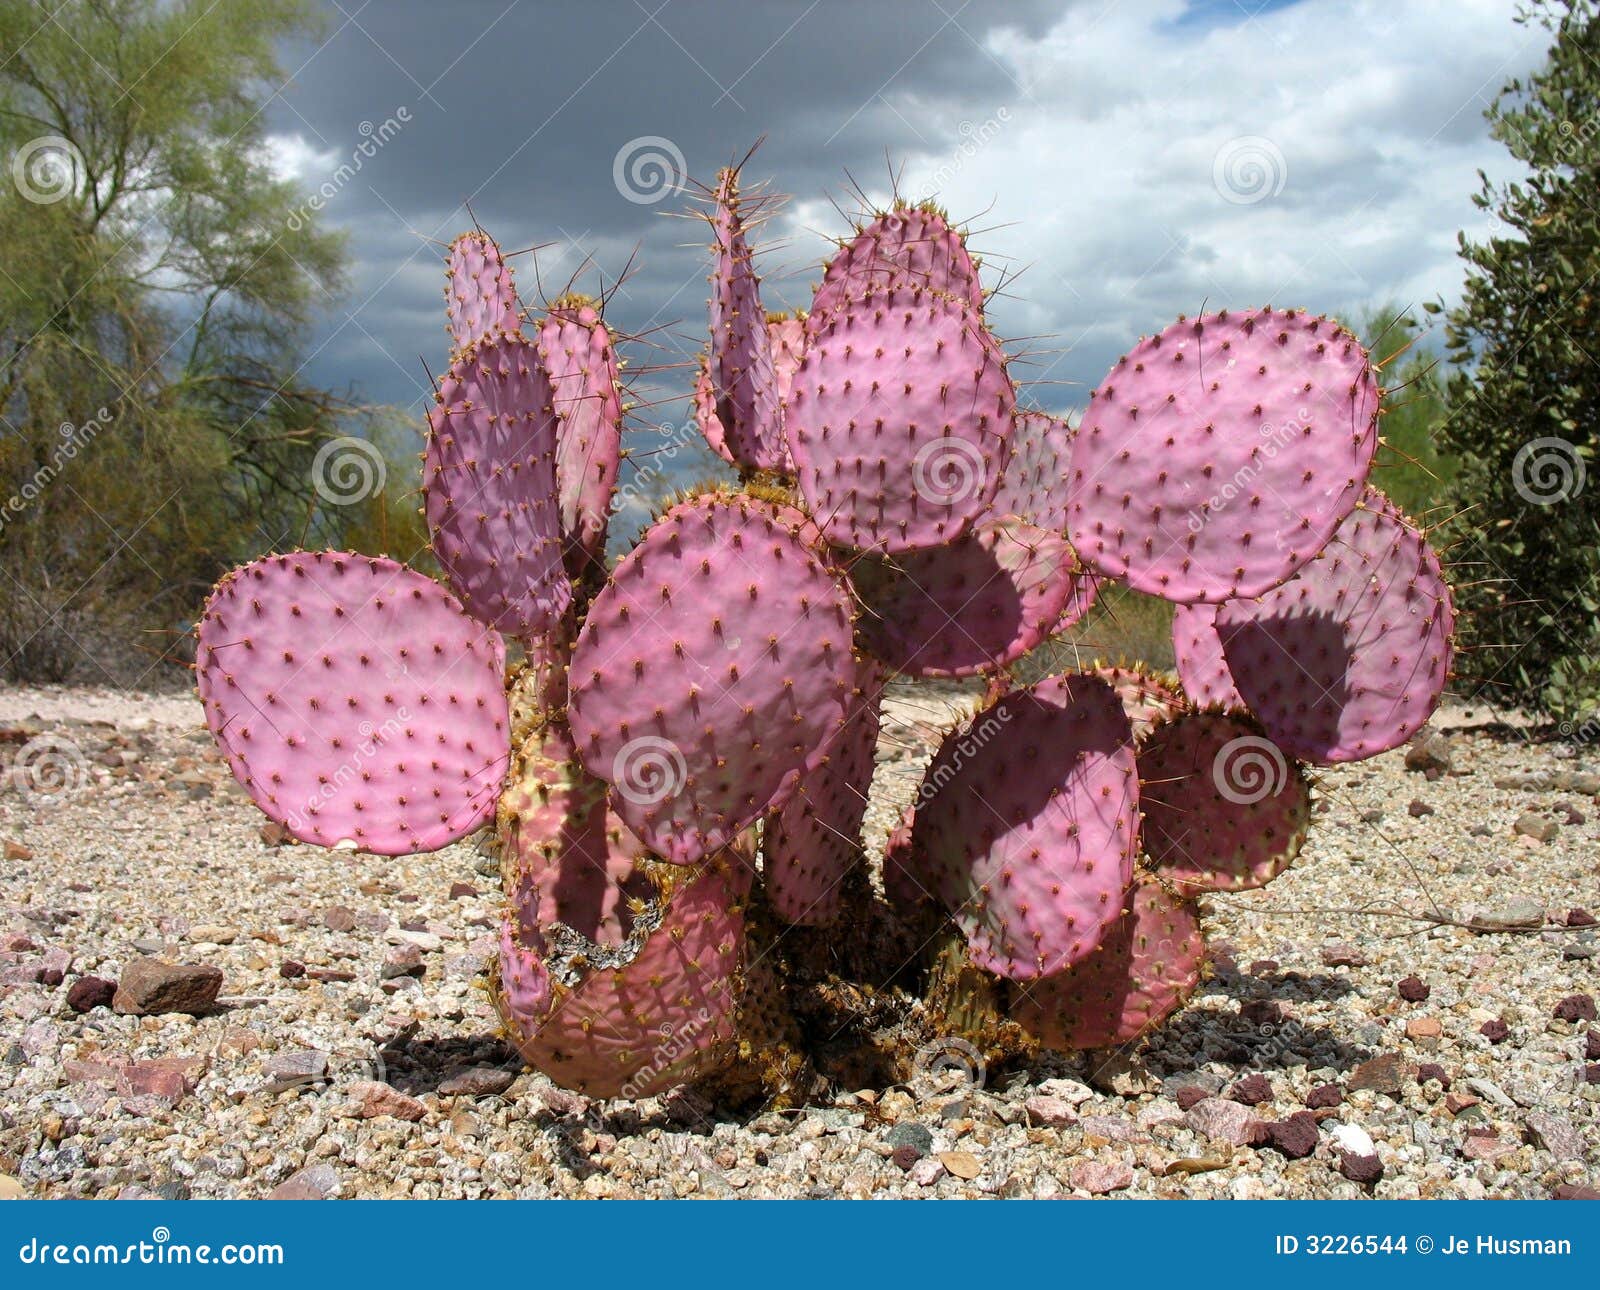 1 364 Purple Prickly Pear Cactus Photos Free Royalty Free Stock Photos From Dreamstime